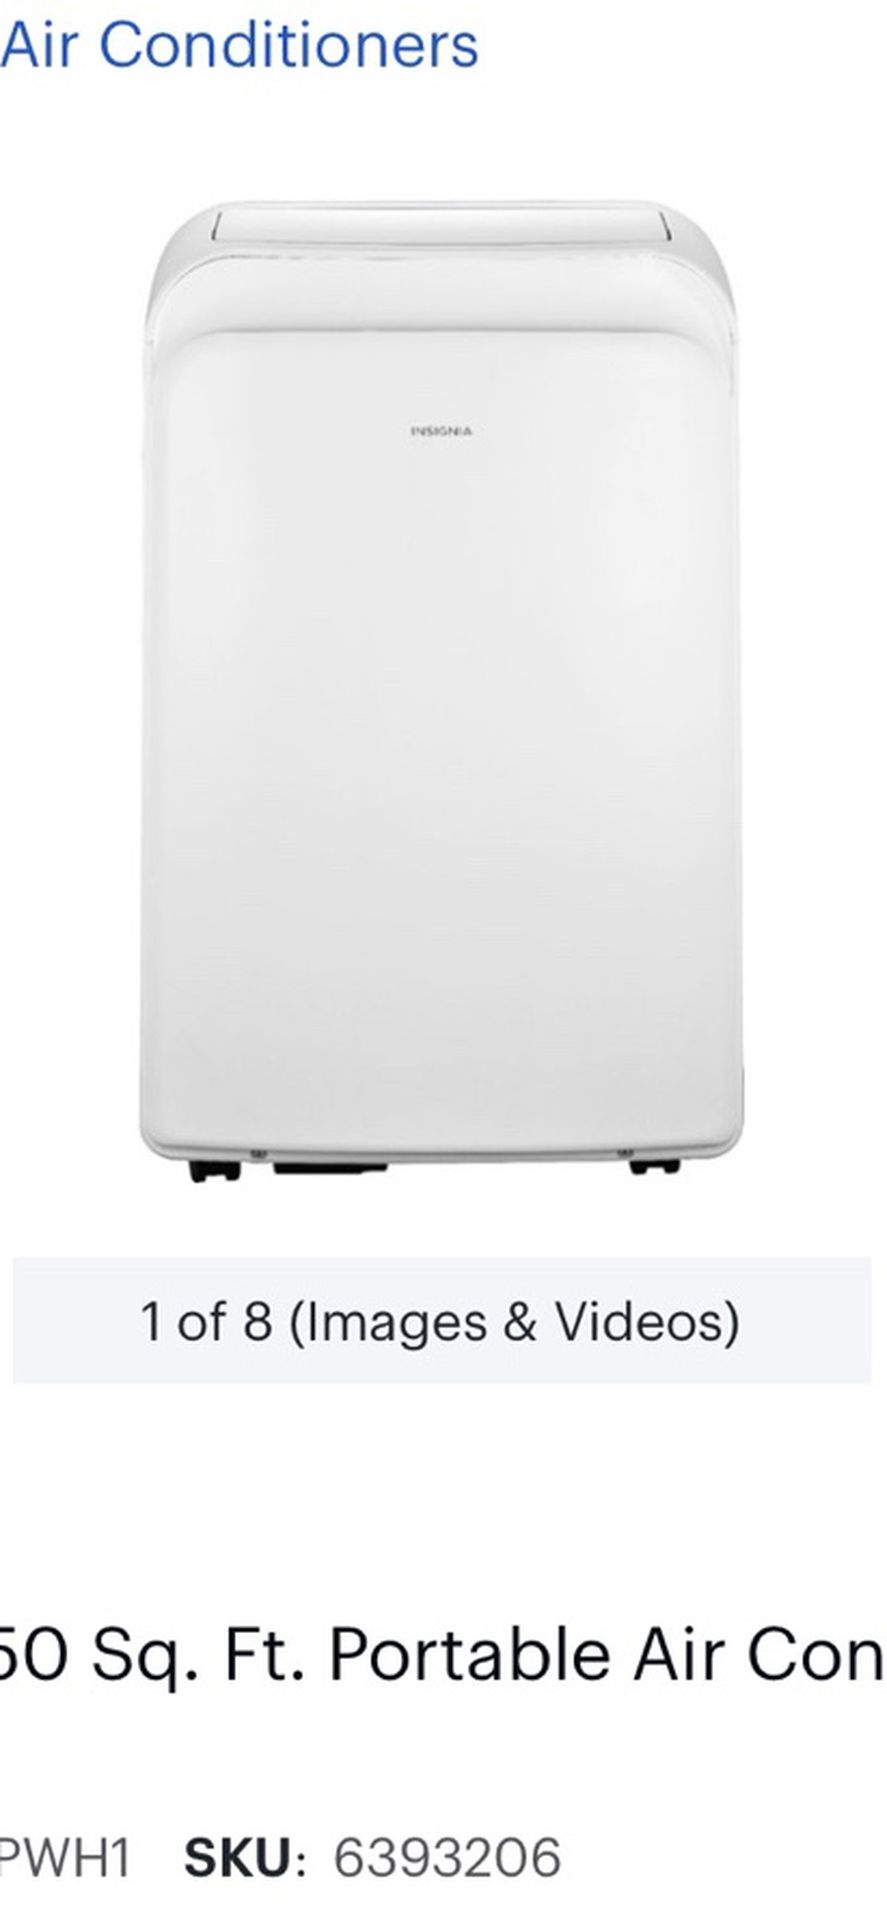 Portable AC Unit- Like New - Retail Price Is $370